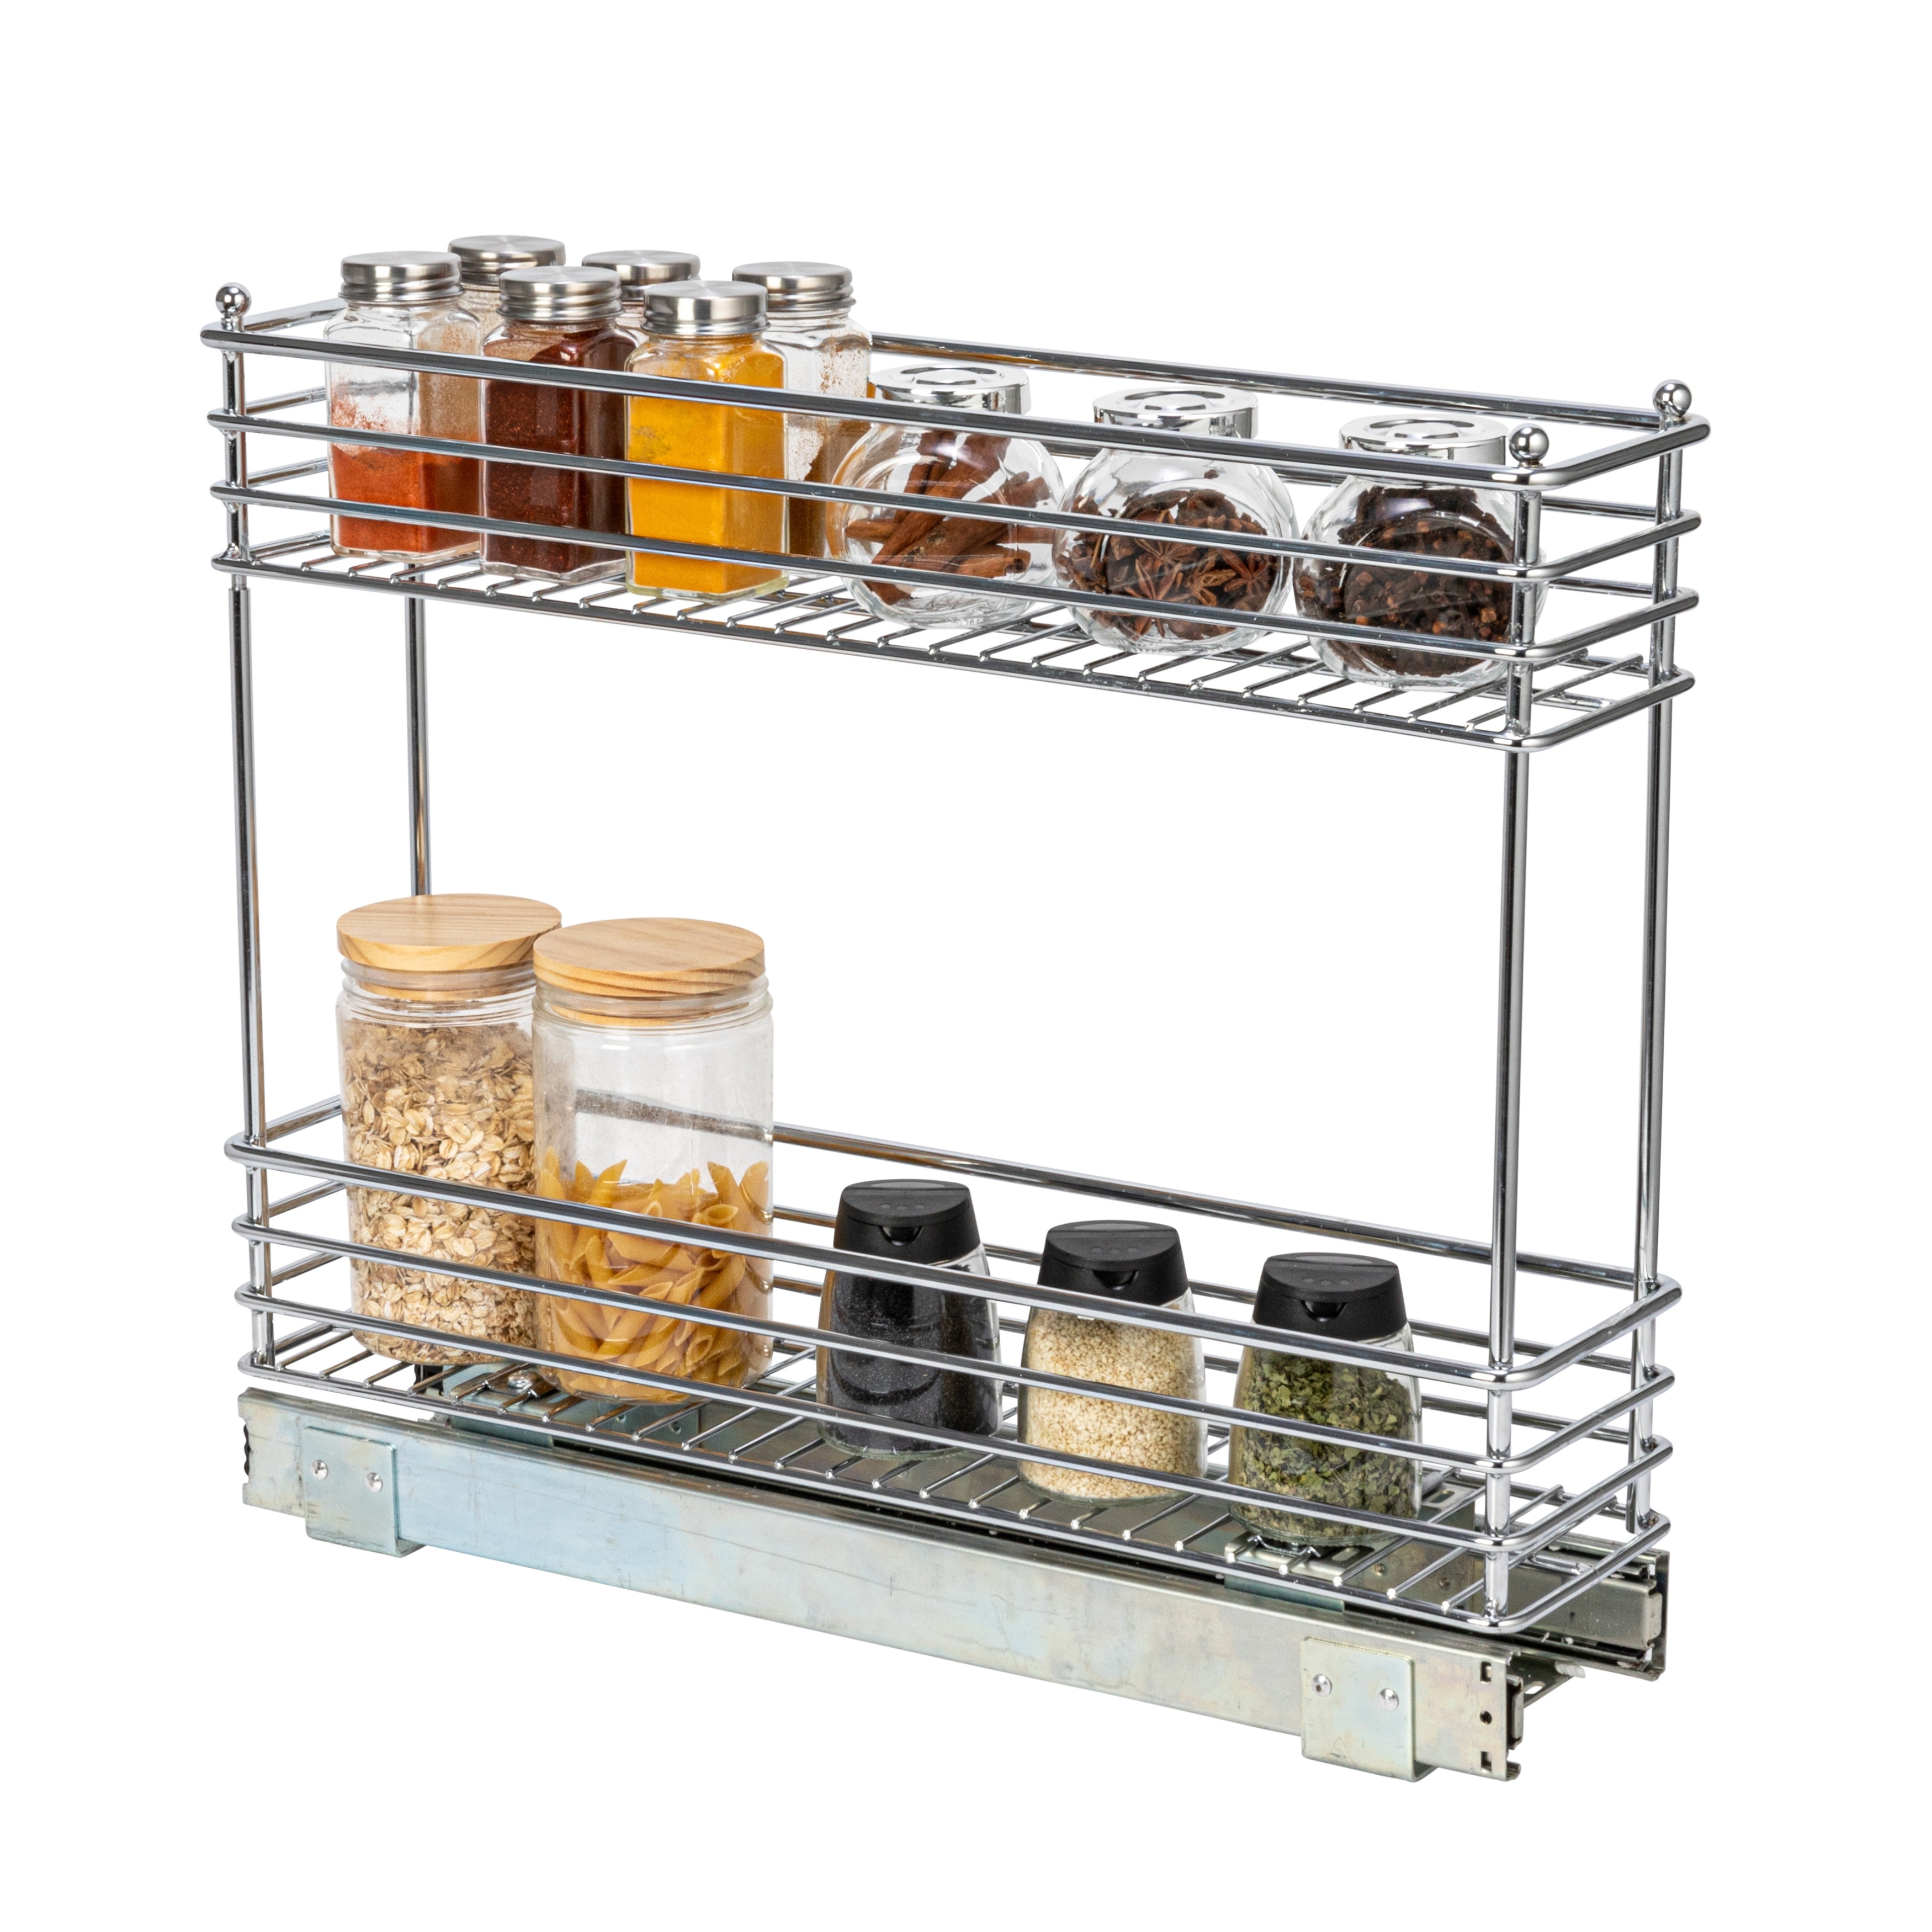 HOUSEHOLD ESSENTIALS 15 in. x 5 in. Glidez Sliding Pantry